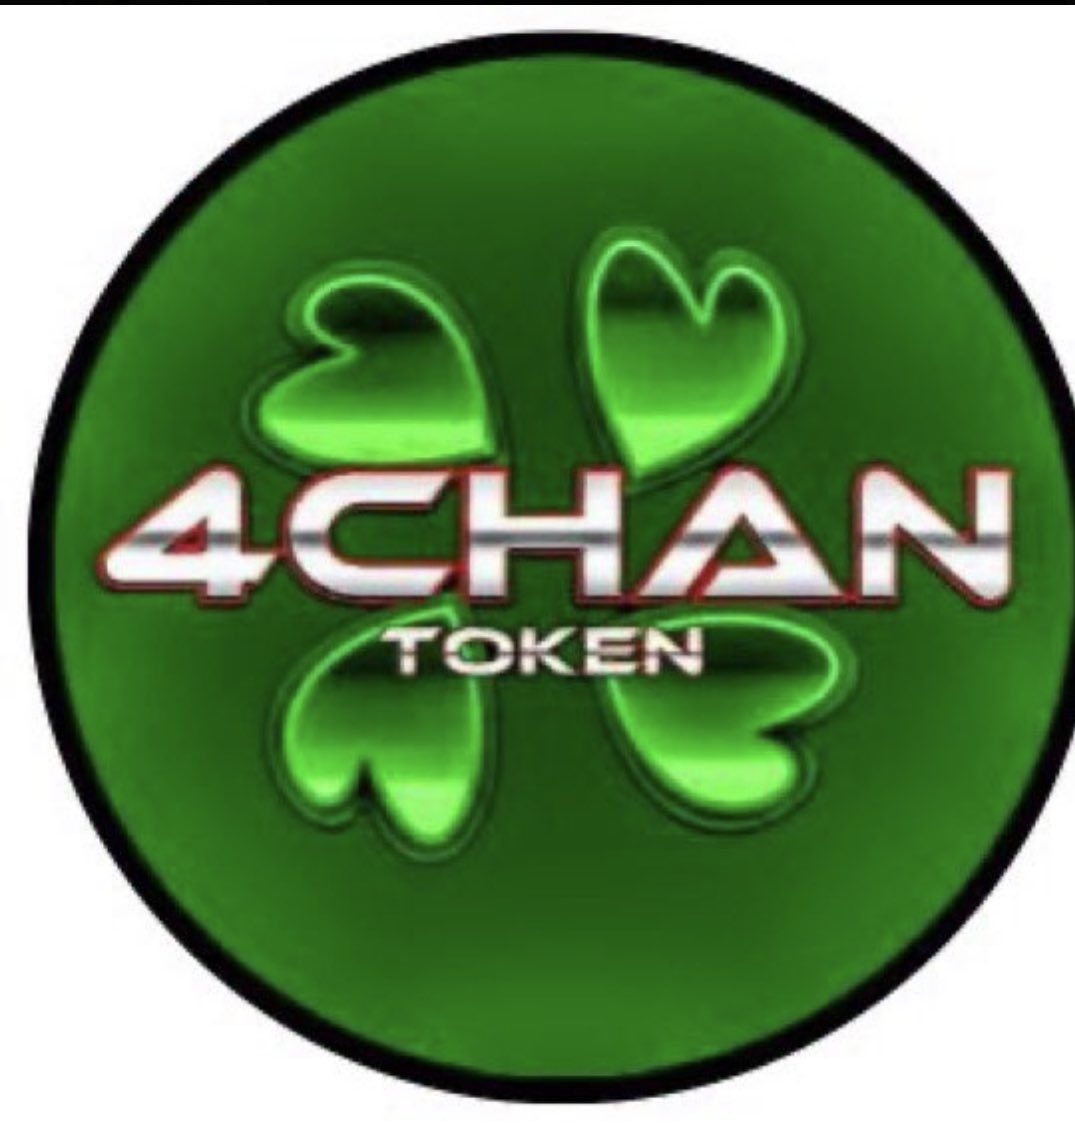 #4ChanFam I am on board #OvationOfTheSeas and have my WiFi so time to join the party!  Great job to everyone who has been getting the word out about #4Chan and the AWESOME community.  Looking forward to sending some video shout out this week from the ship and Alaska!!